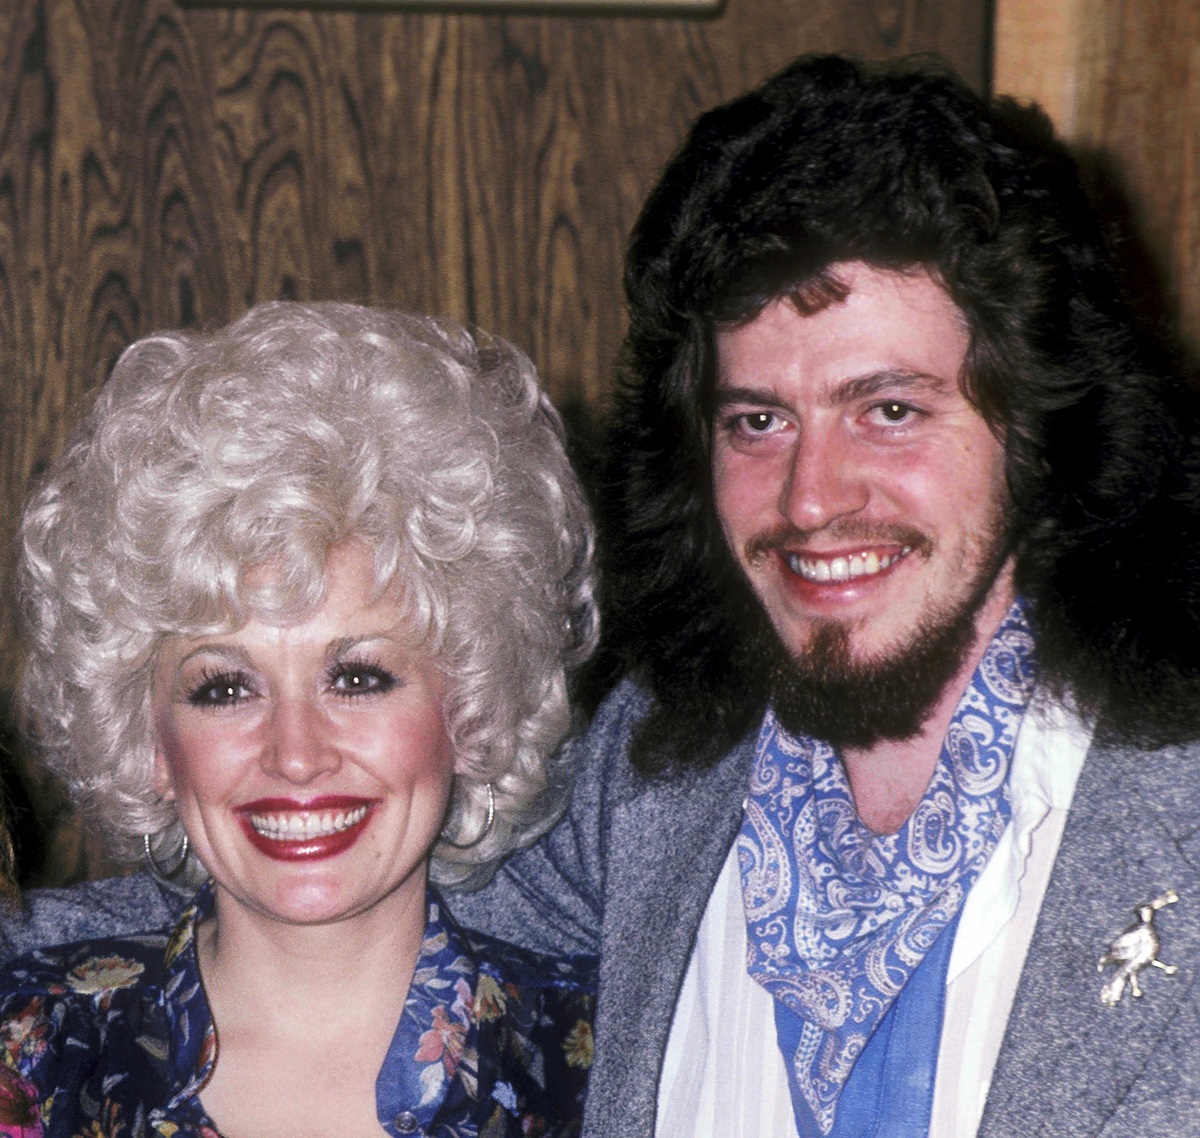 Dolly Parton and her brother Floyd Parton at a recording studio together